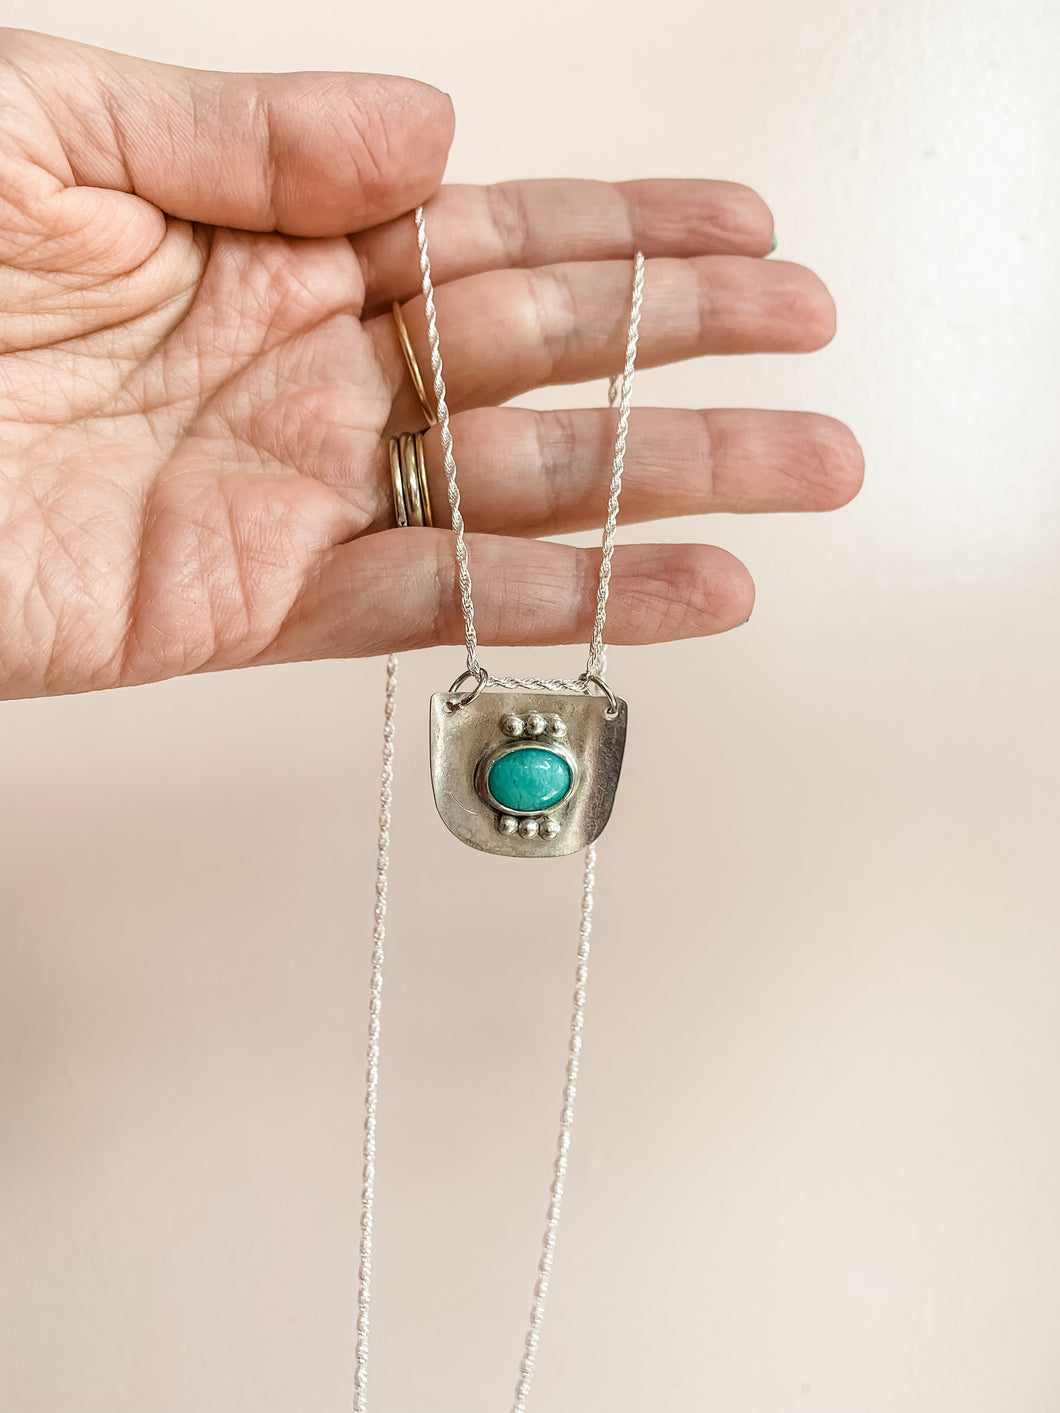 Amazonite Sterling Silver Shield Dainty Necklace